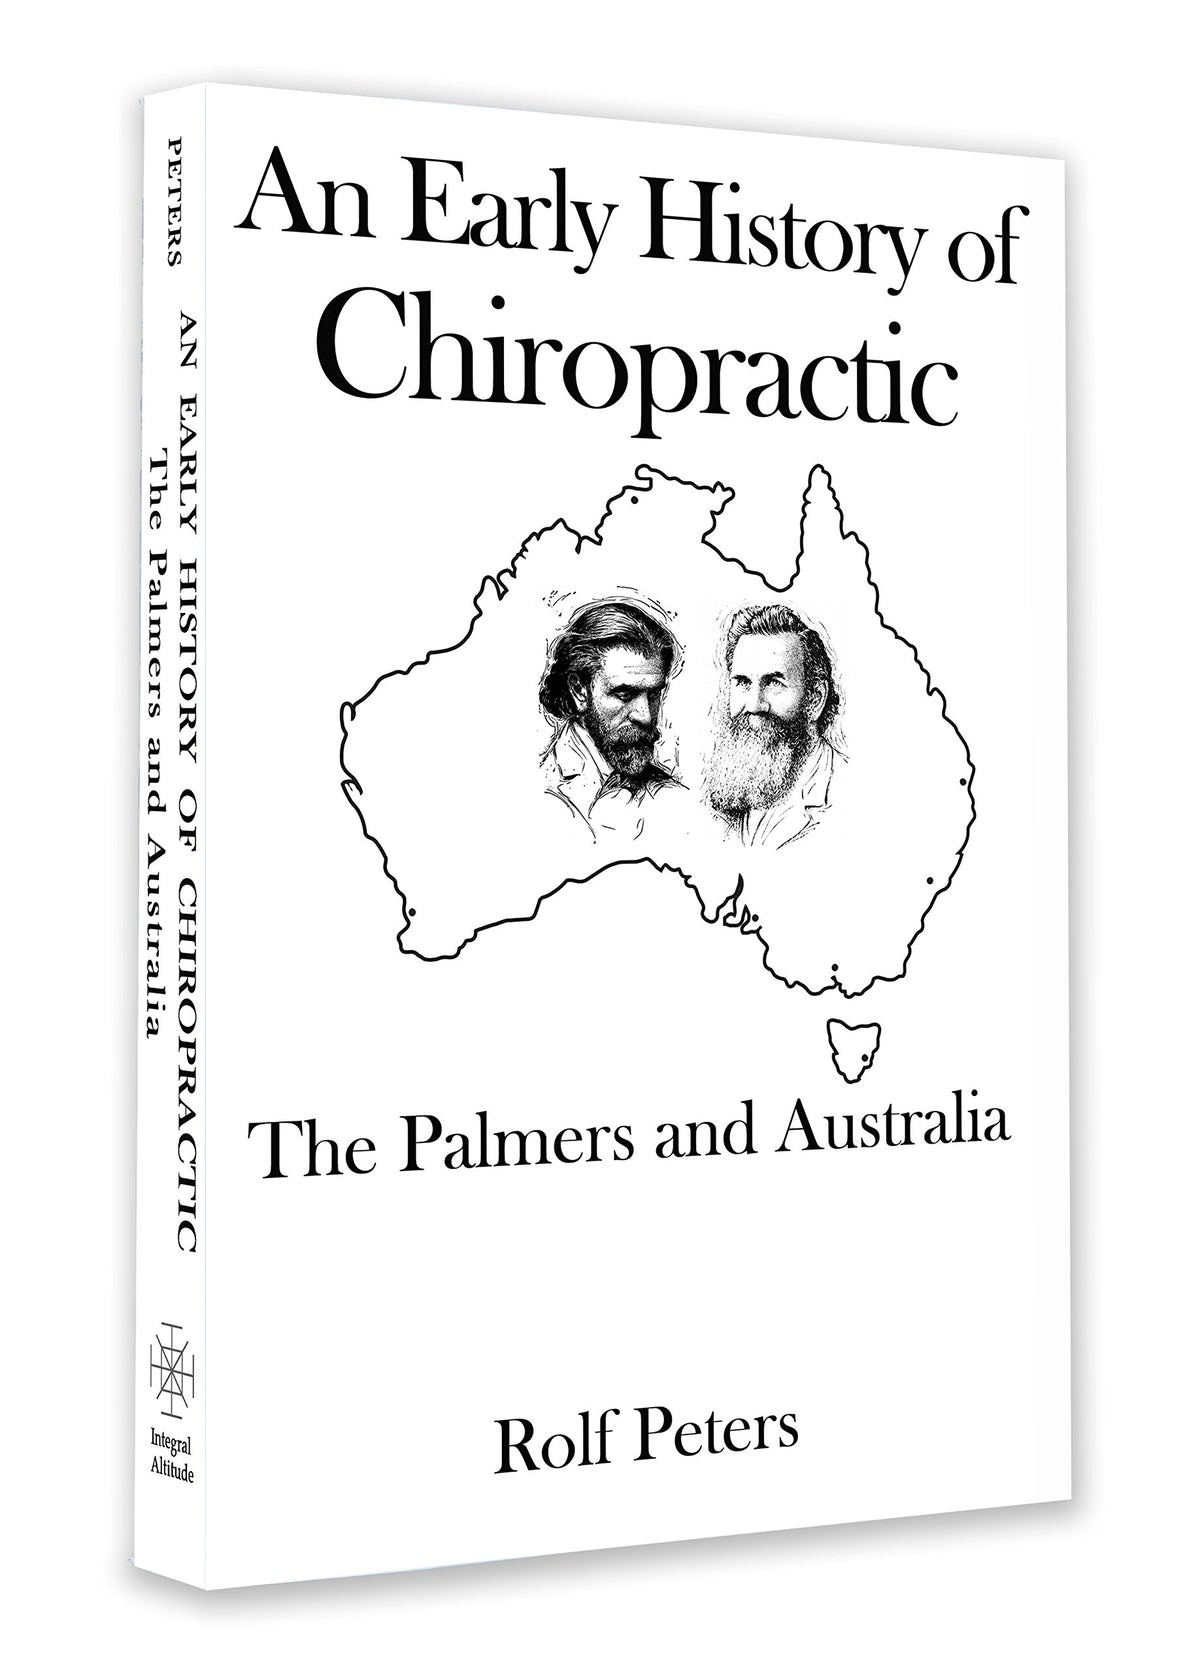 An Early History Or Chiropractic by Rolf Peters